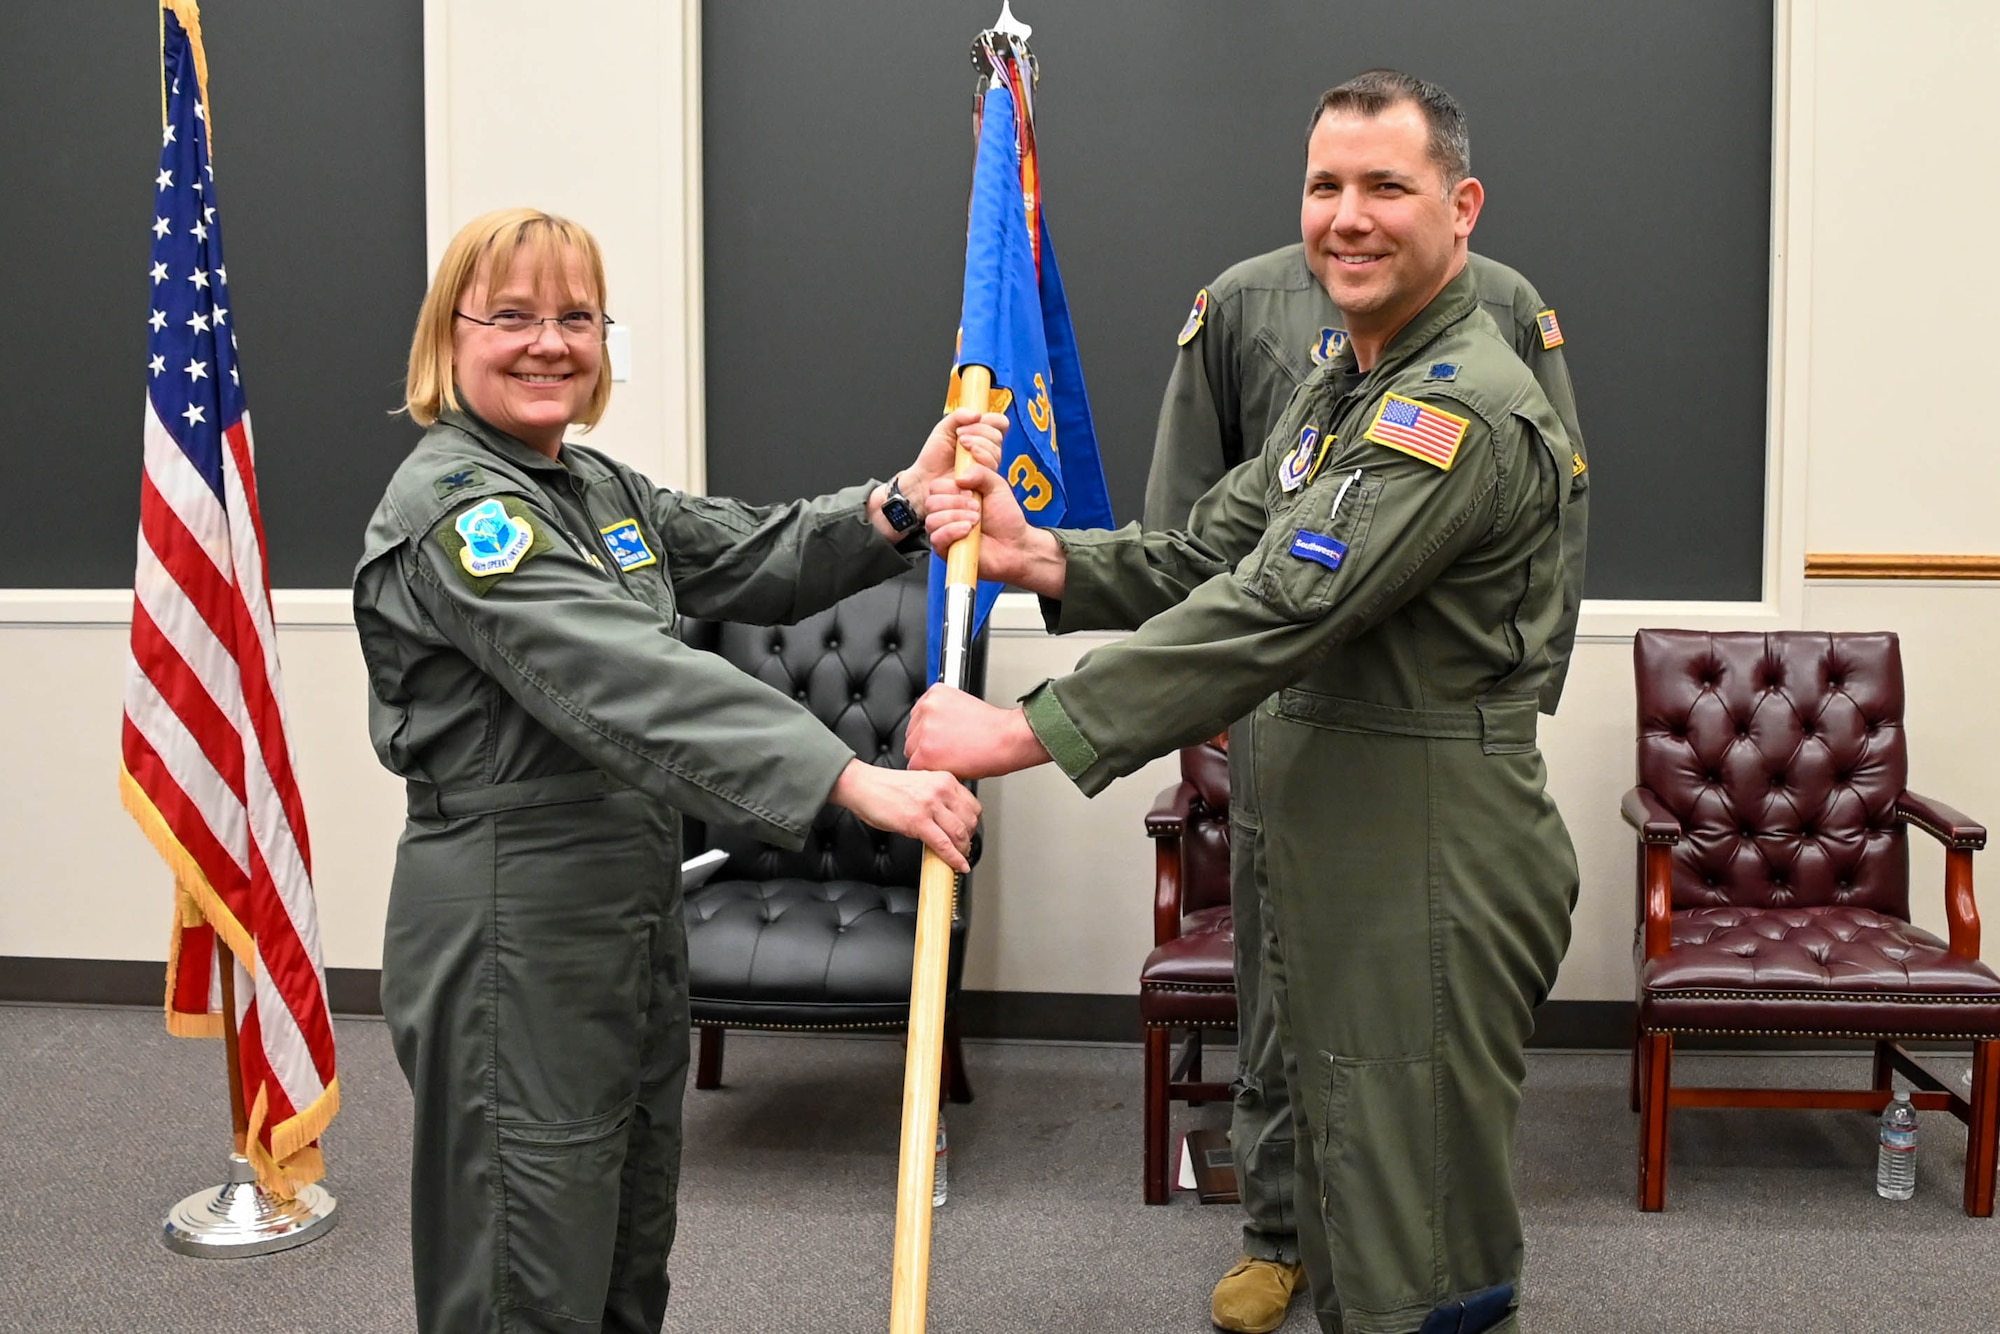 A woman in a green flight suit hands the blue flag to a man in a green flight suit in front of an American Flag.